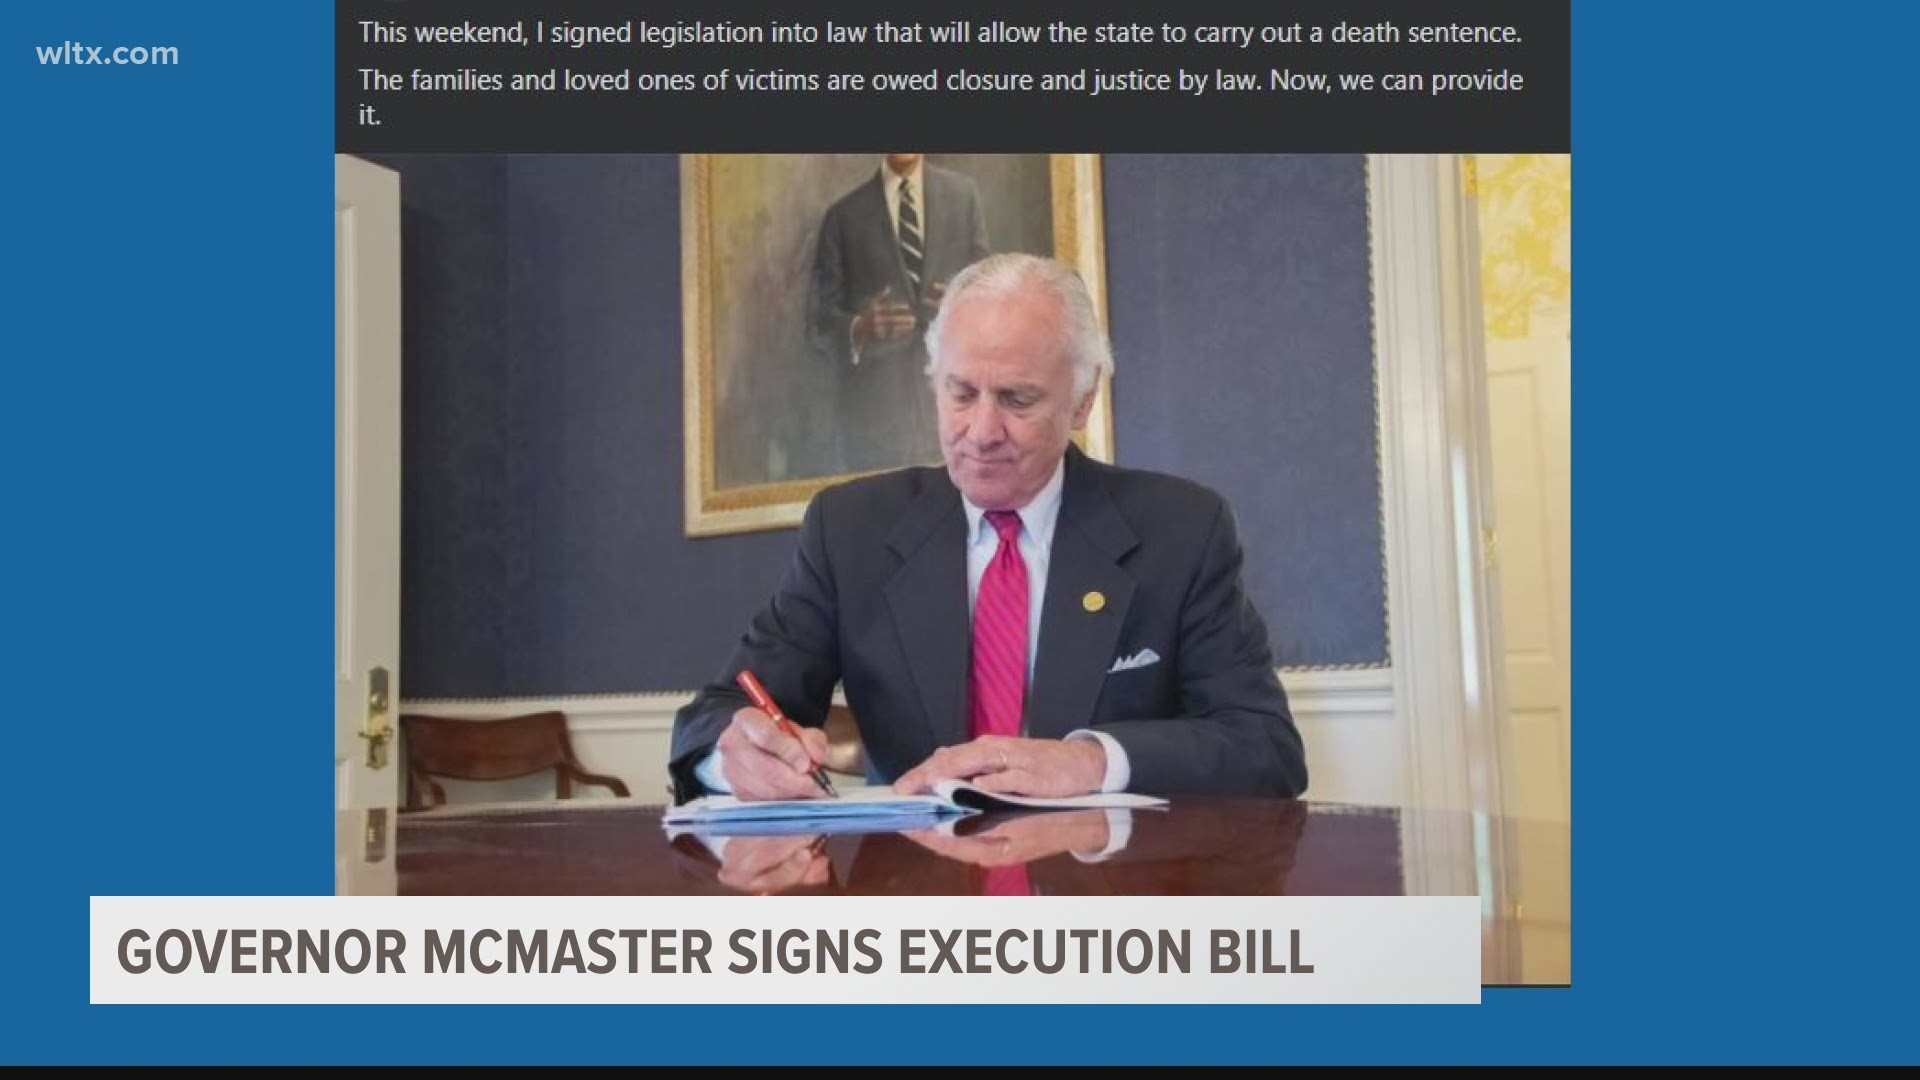 South Carolina's governor has signed a law that let's death row prisoners choose between a firing squad and the electric chair.